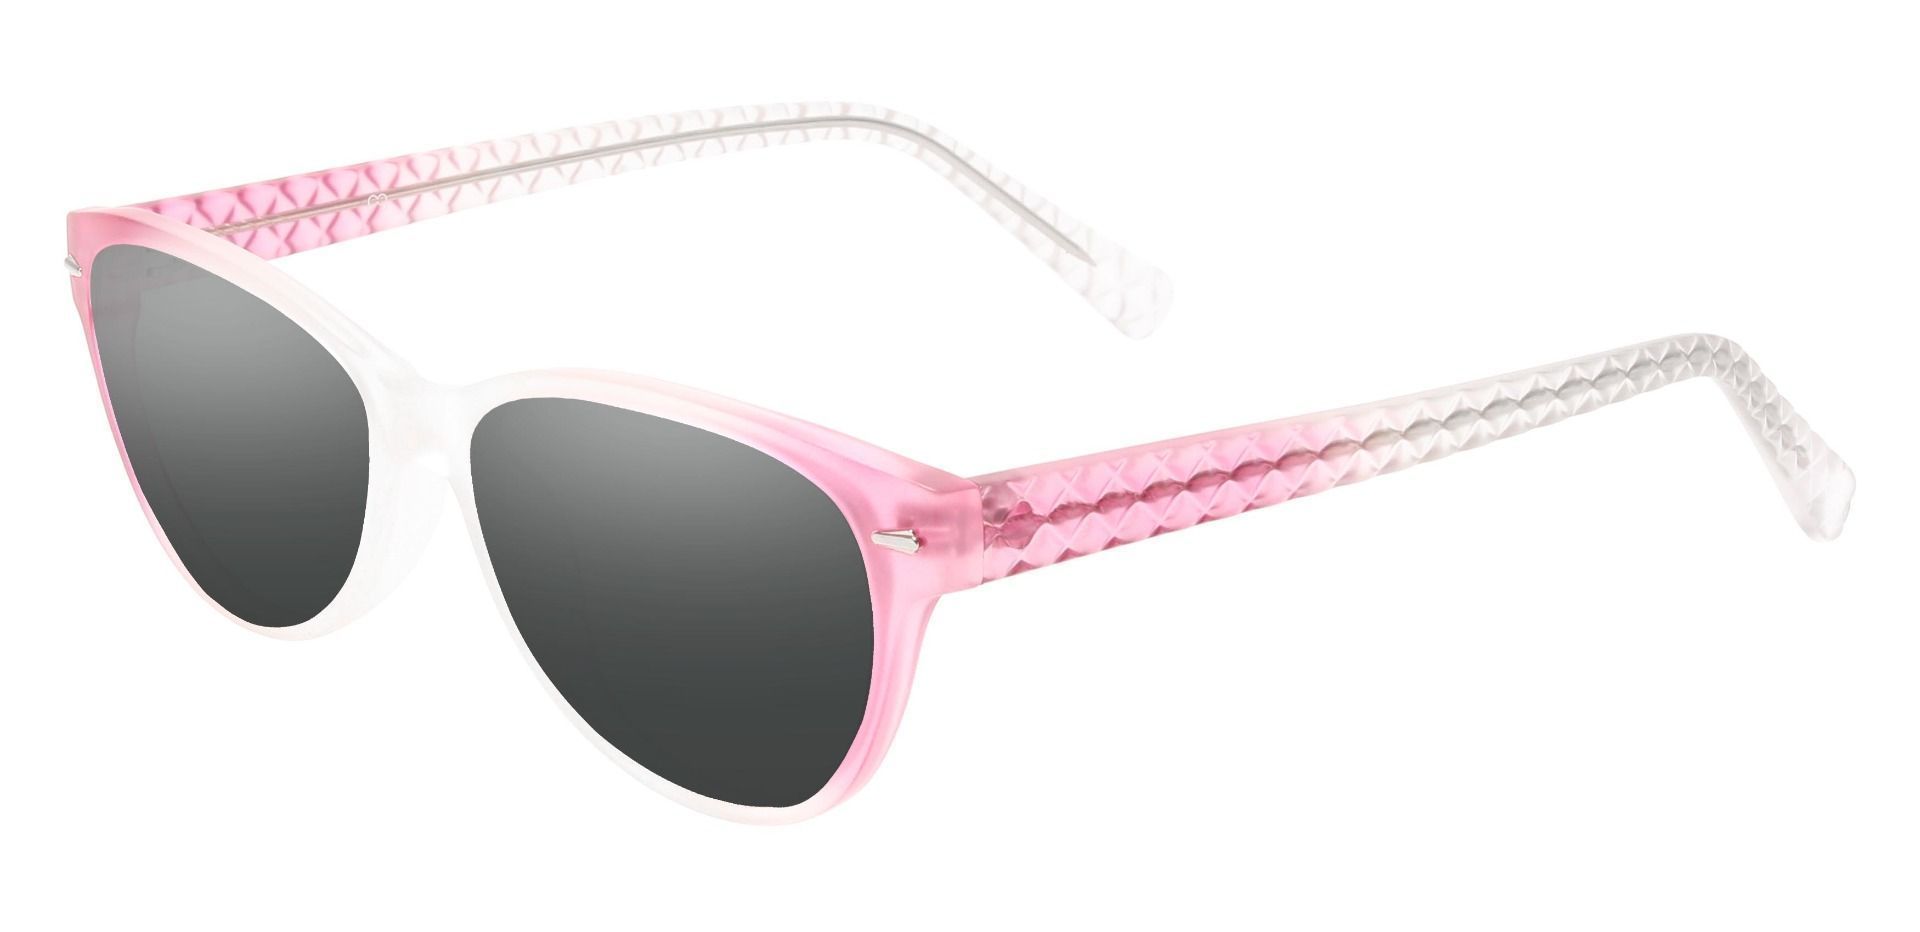 Olive Cat Eye Reading Sunglasses - Pink Frame With Gray Lenses